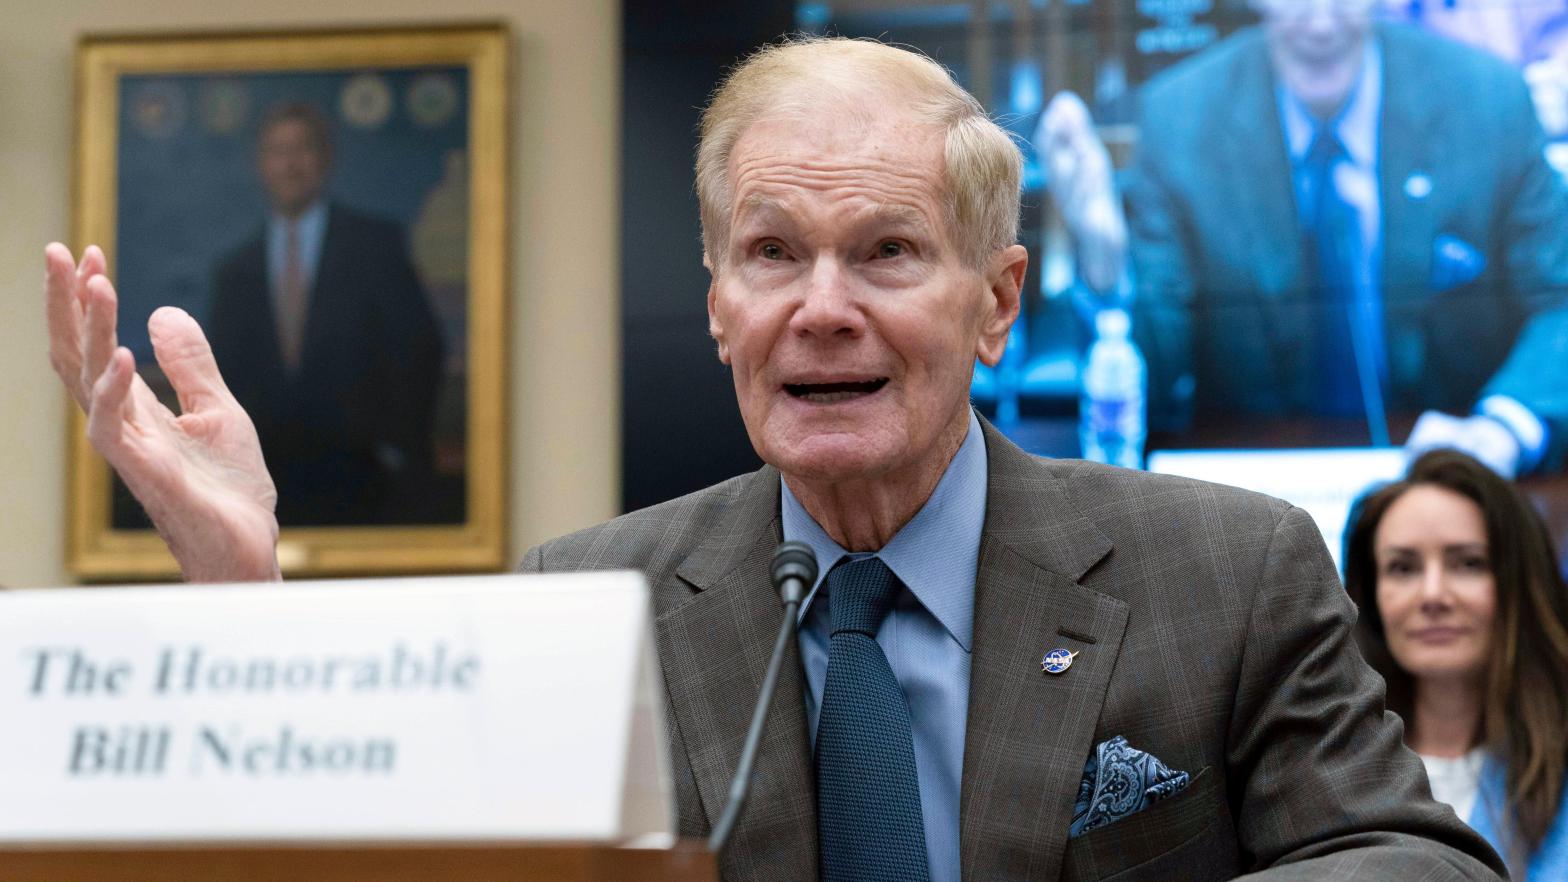 NASA Administrator Bill Nelson testifying before the House Science, Space, and Technology Committee on Thursday, April 27. (Photo: Jose Luis Magana, AP)